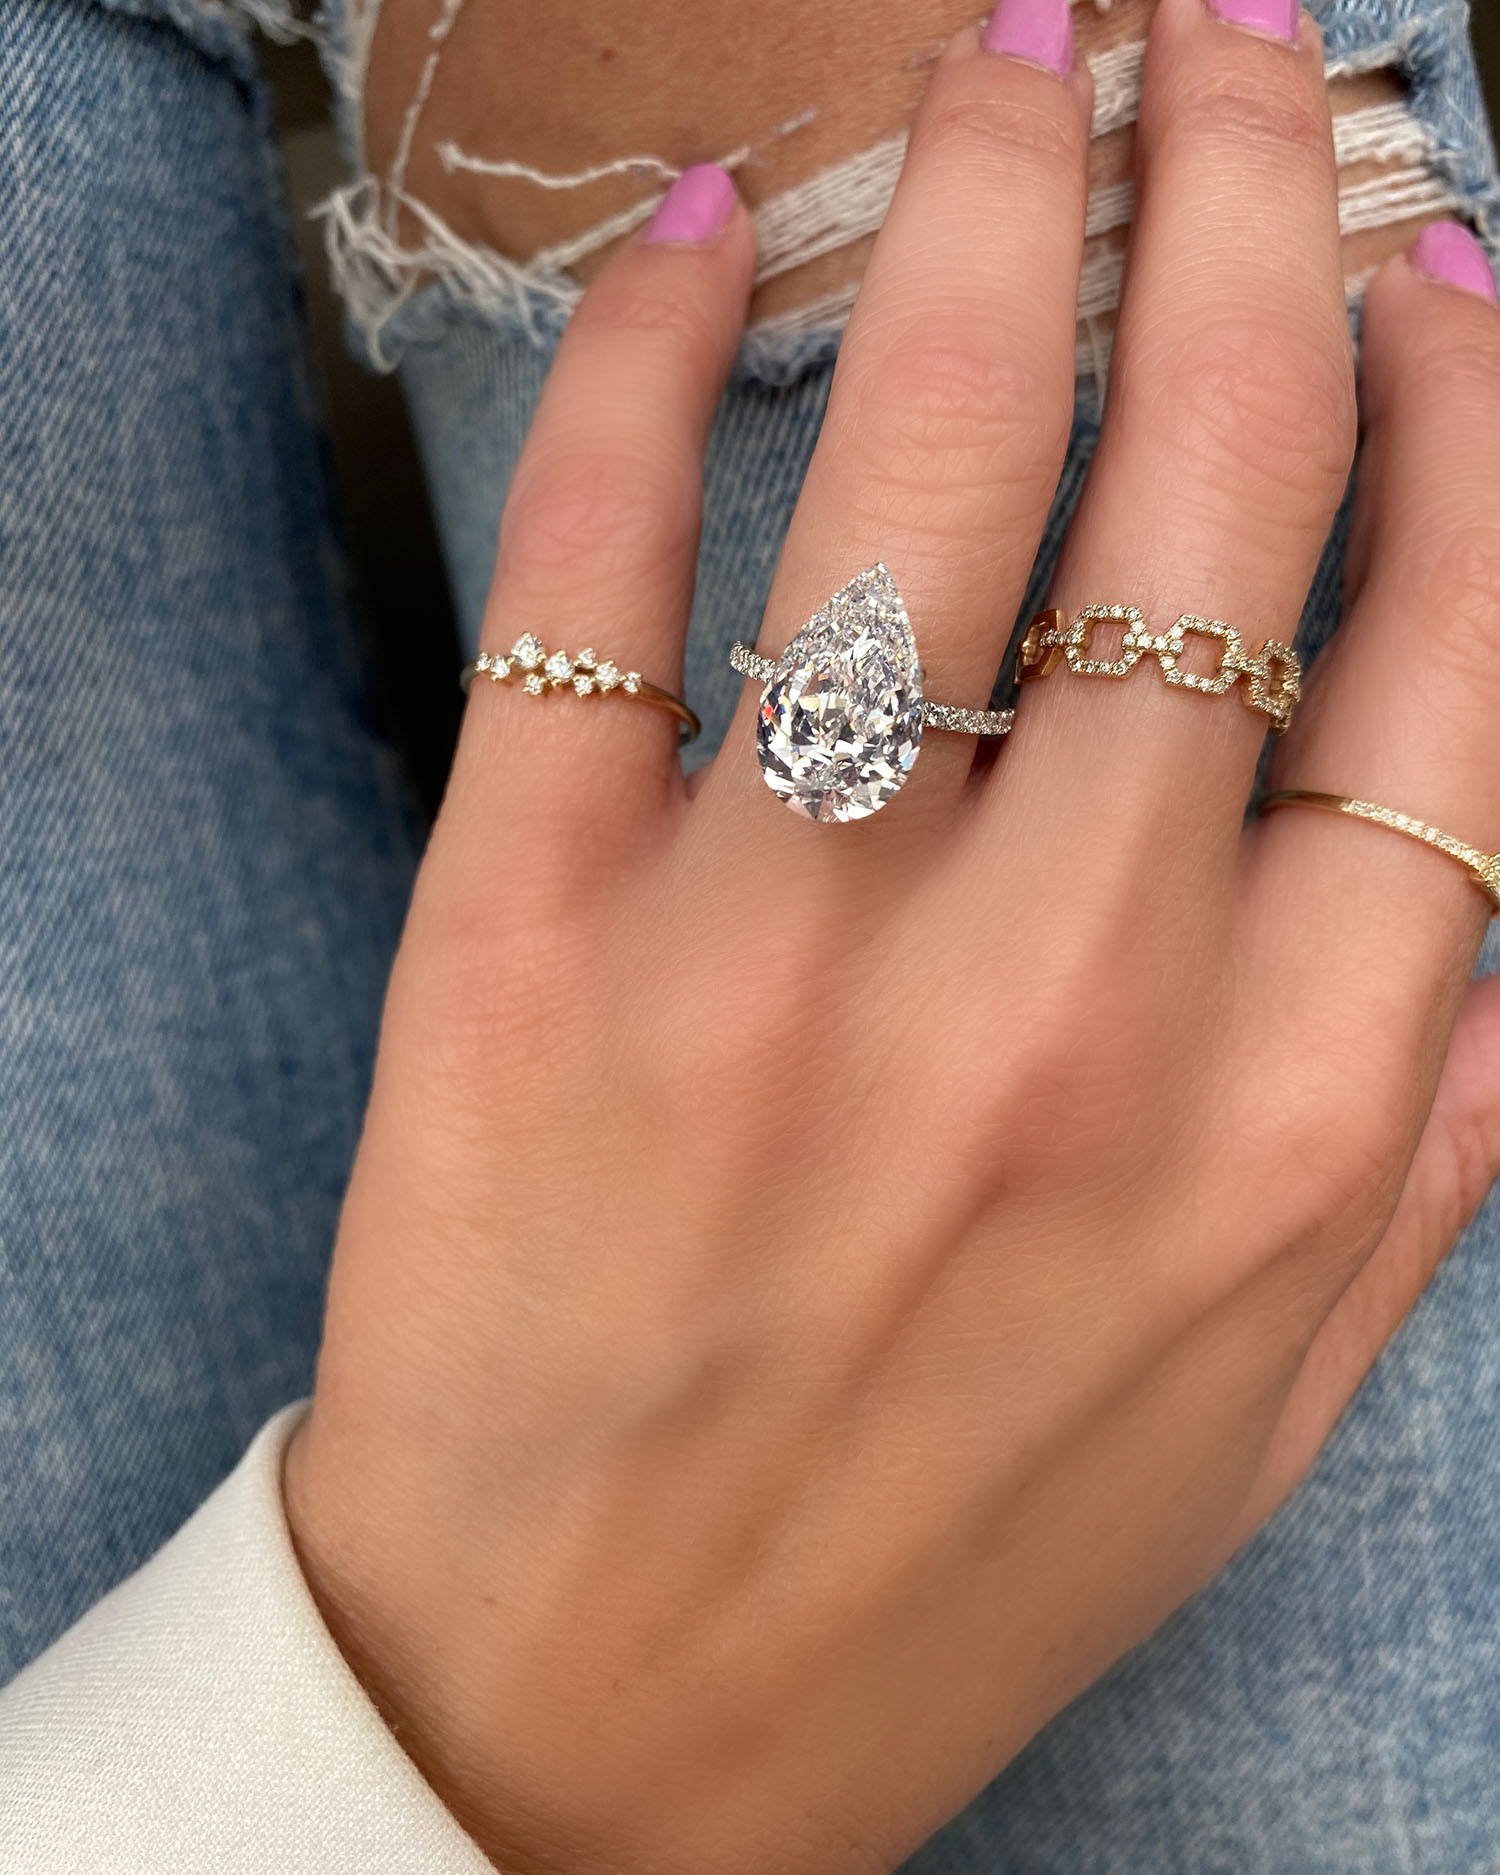 Best Online Jewelry Shops for Your Engagement